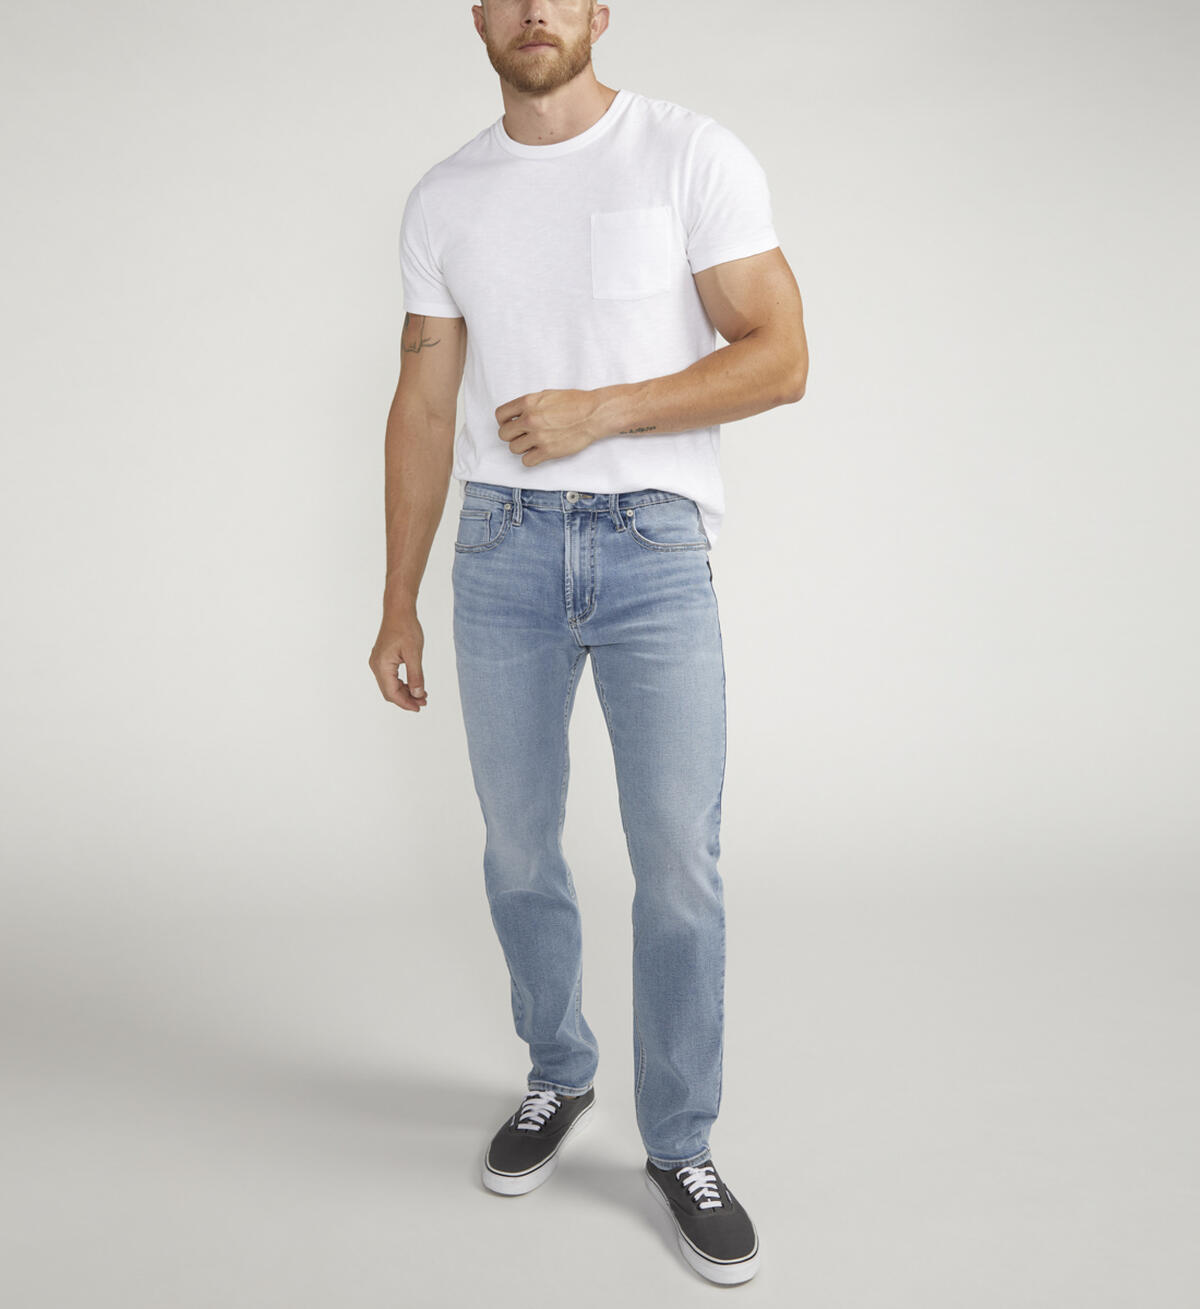 Sleek and streamlined from hip to ankle, Konrad has a straighter slim fit that looks (and feels) amazing no matter where you wear it. This men’s jean sits below the waist and features a slim fit through the hip and thigh with just enough room. Finished with an everyday 14” slim leg opening.